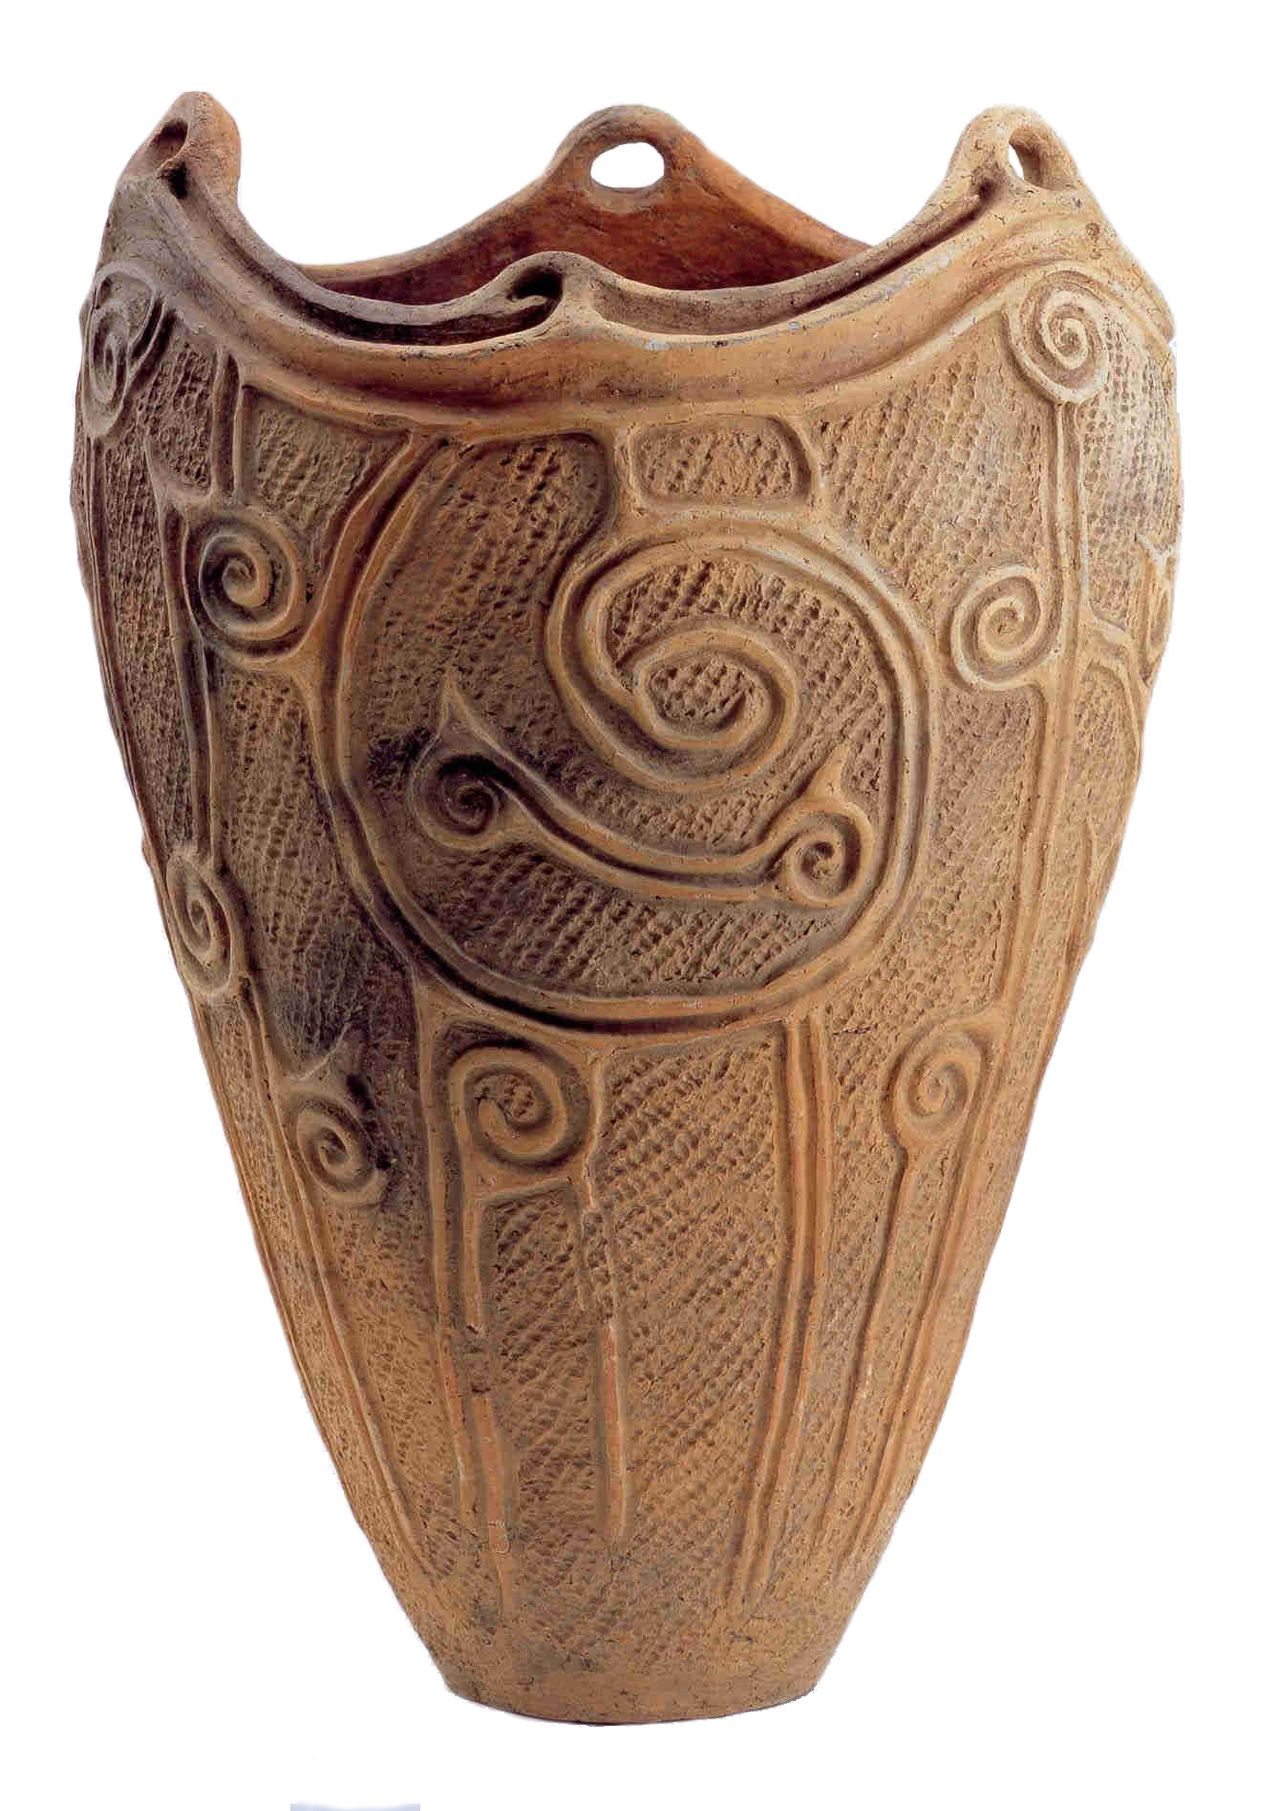 A container with spiral patterns excavated from a site in Morioka, Iwate Prefecture. (Courtesy Morioka Archeological Site Study Museum)